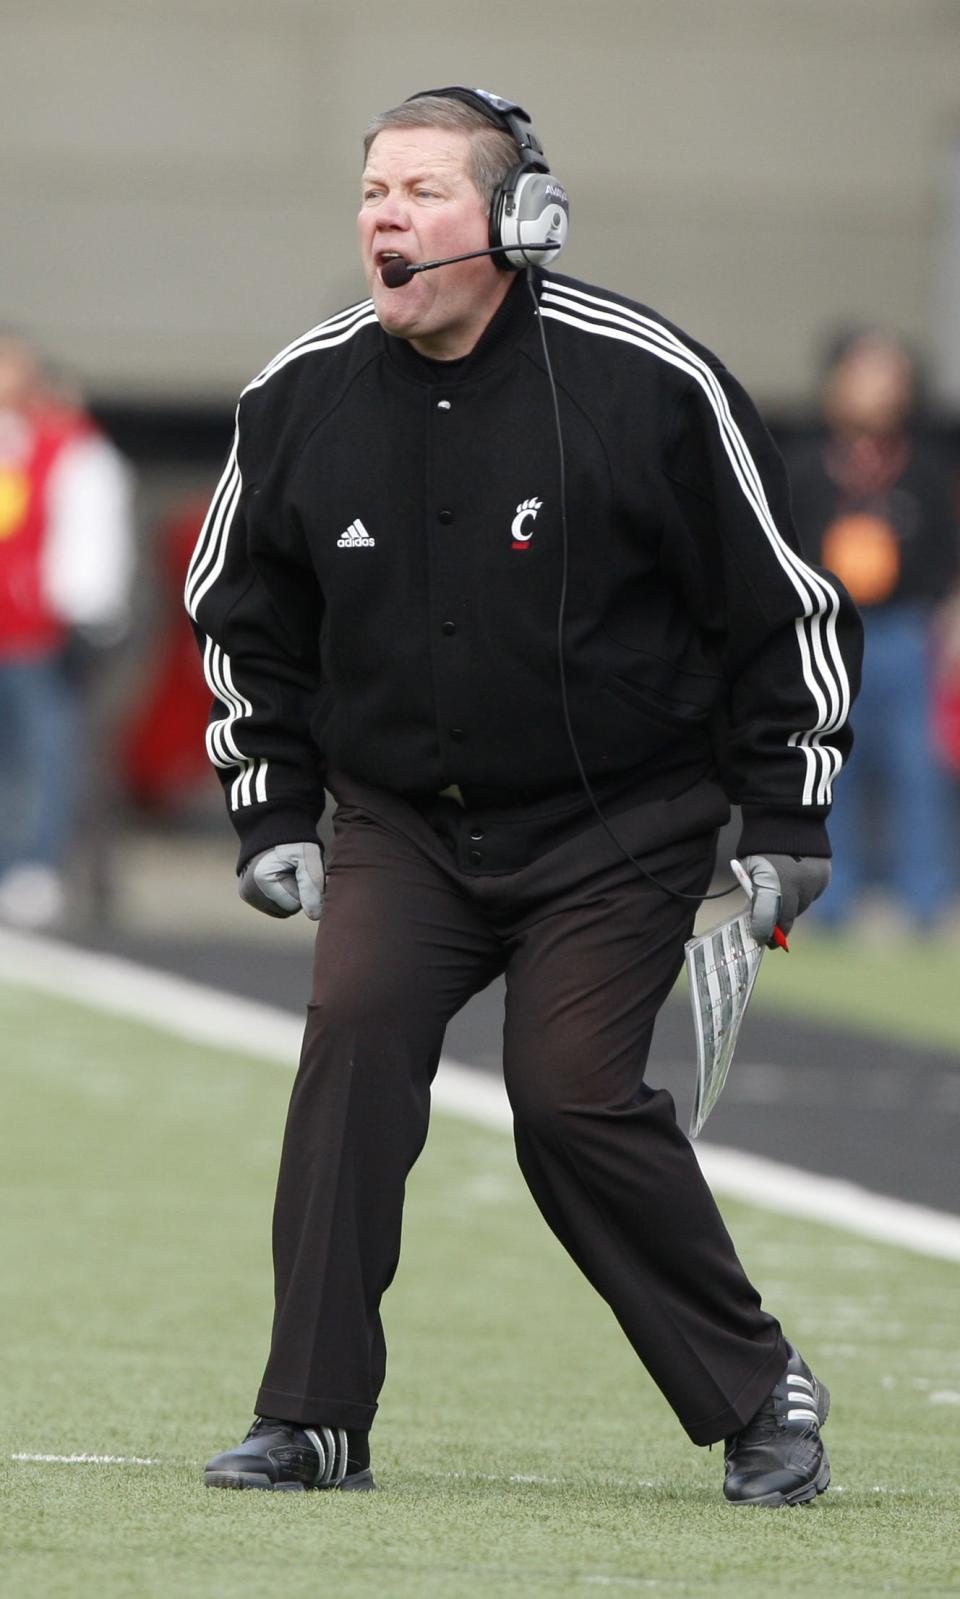 Then-University of Cincinnati head coach Brian Kelly yells instructions during the fourth quarter against Illinois at Nippert Stadium, Nov. 27, 2009. Kelly coached both Jason and Travis Kelce who will play against each other in Super Bowl 57.